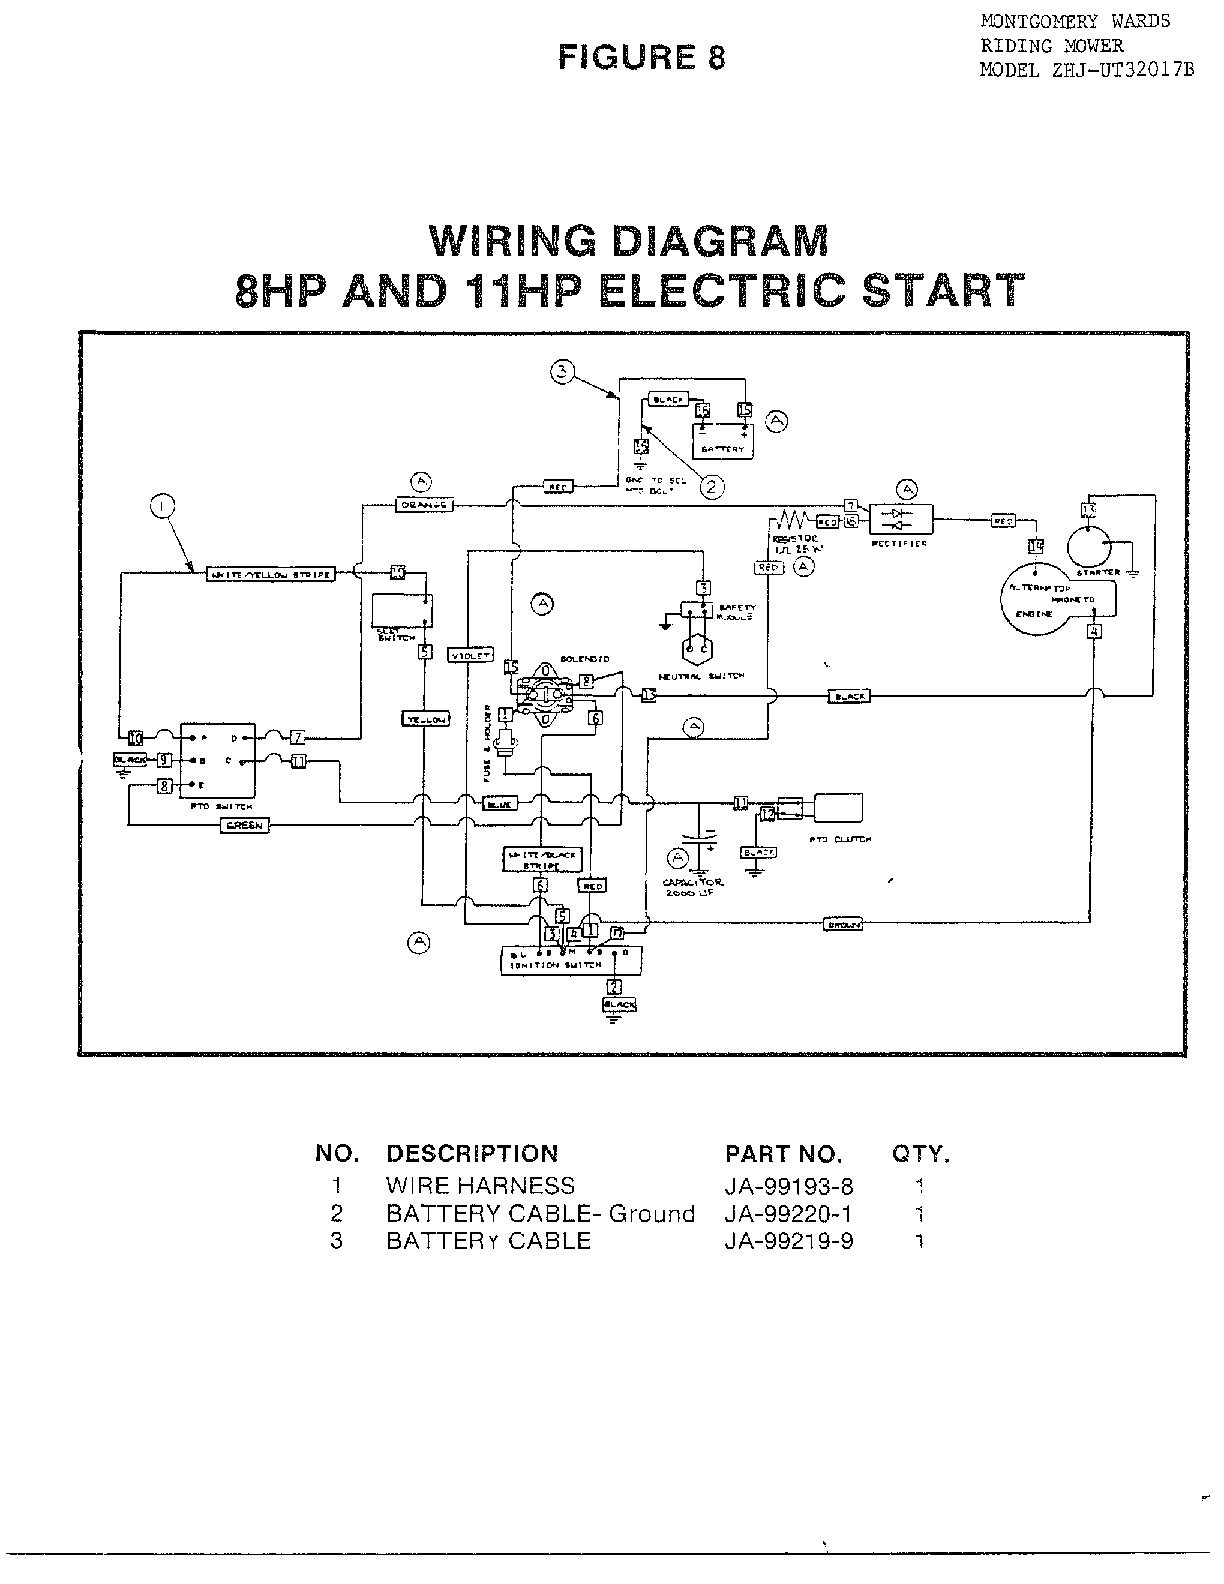 Briggs And Stratton Wiring Diagram 12hp Awesome Image